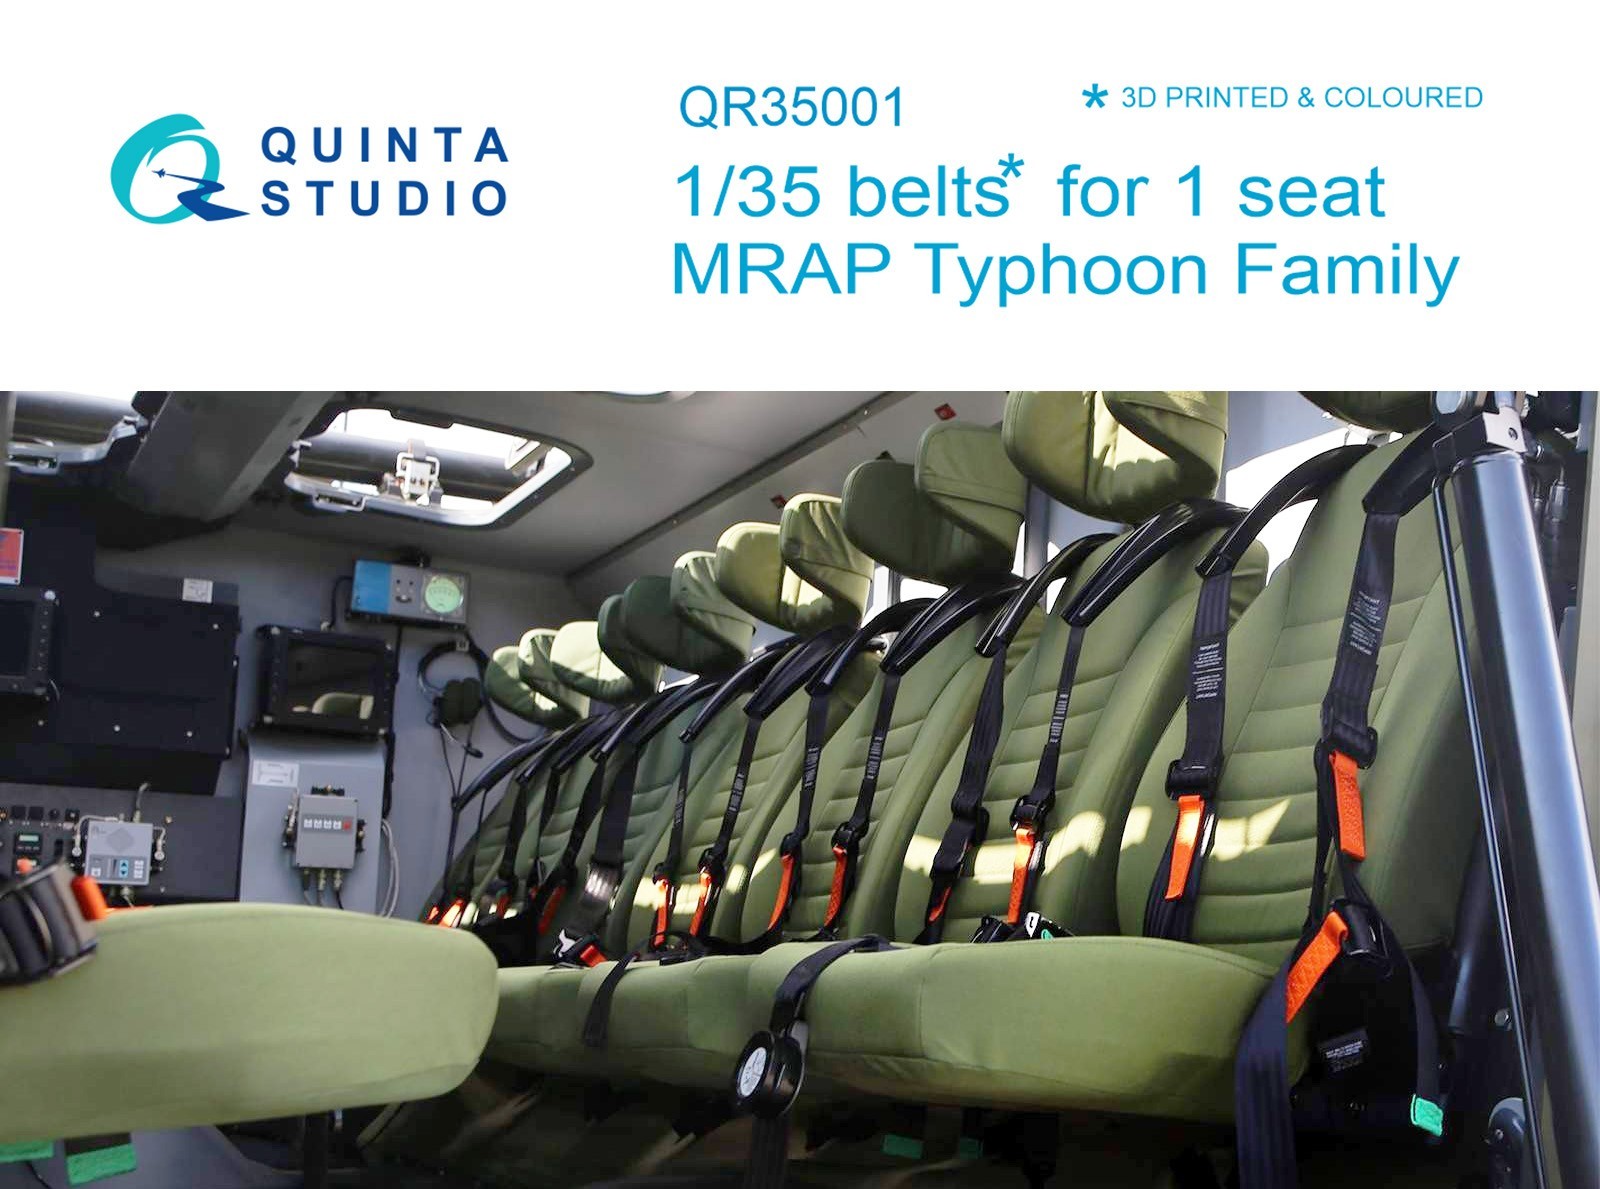 QR35001 - MRAP Typhoon Family belts for 1 seat, 3D-Printed & coloured on decal paper (for all kits)